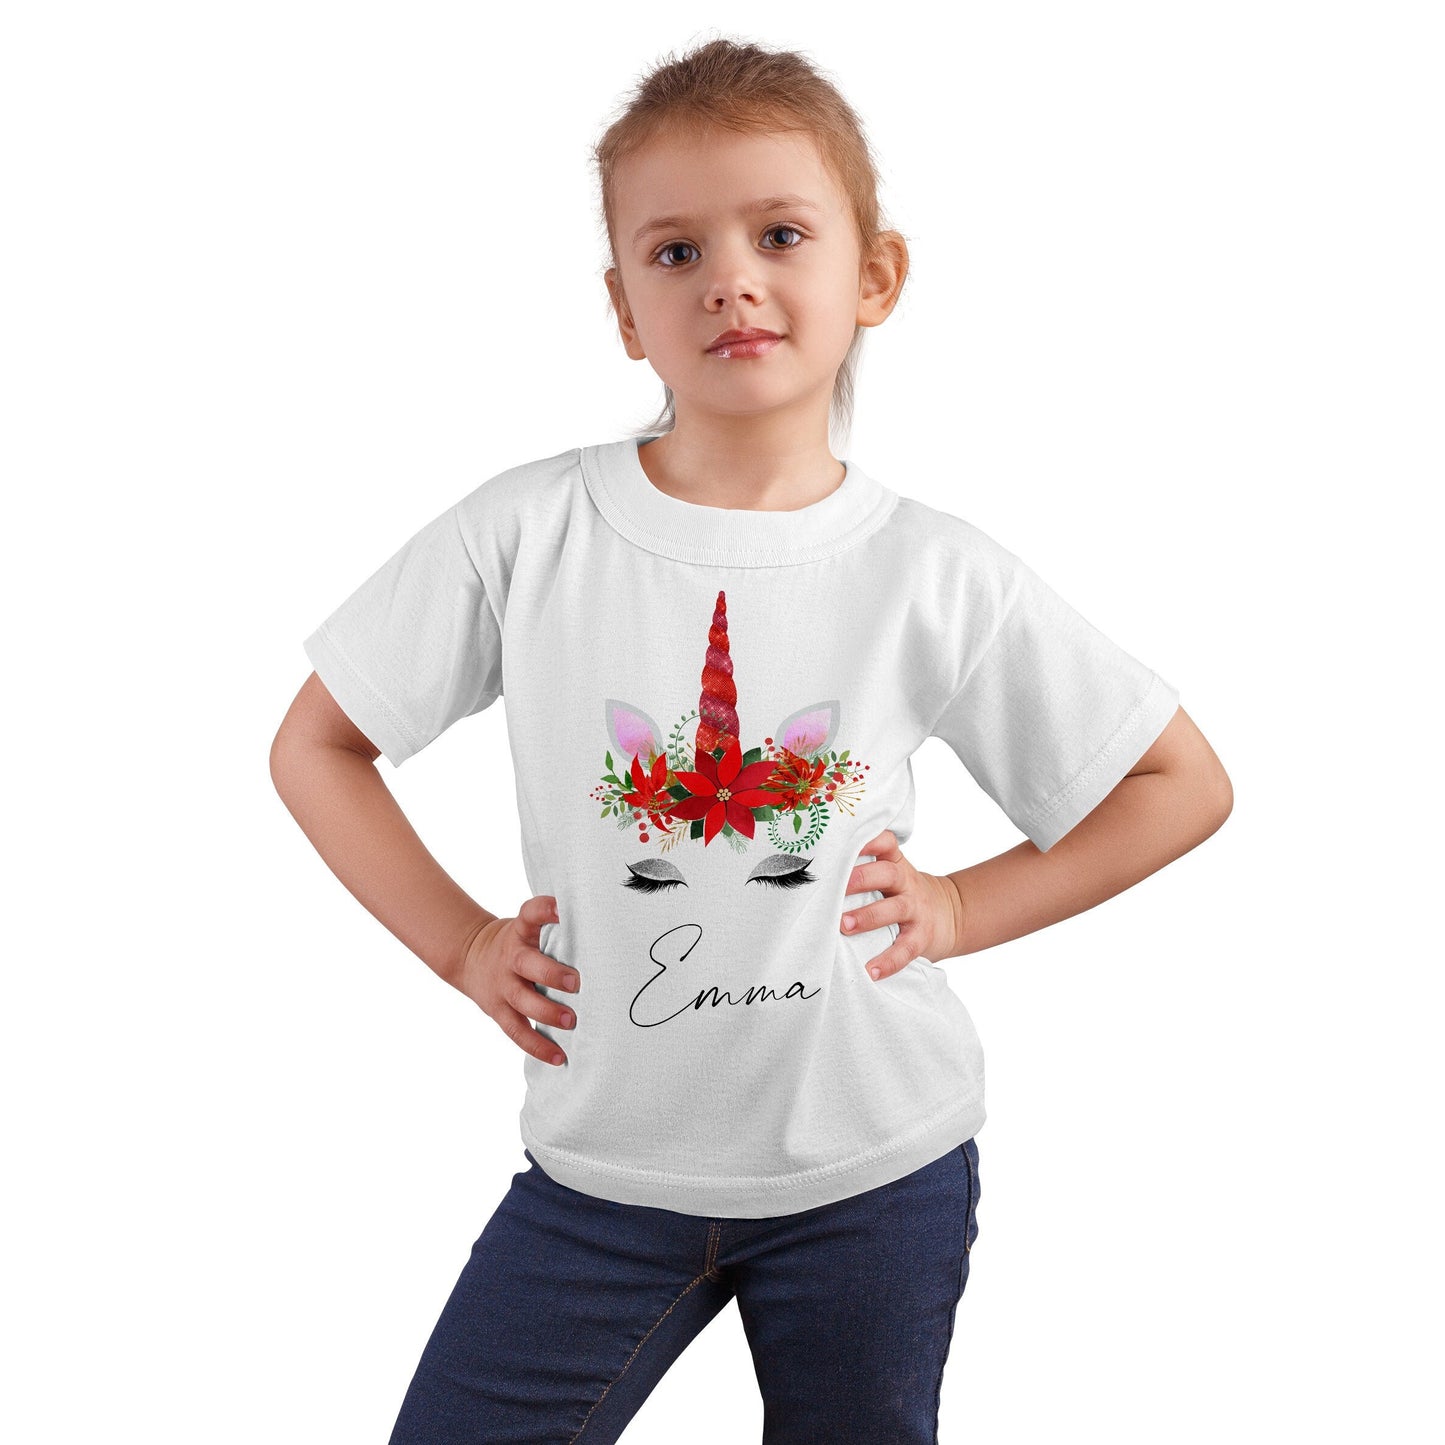 Personalised Children's Girls T-Shirt, Red Unicorn Design With Name, Custom Clothing, Kids Tee, Floral